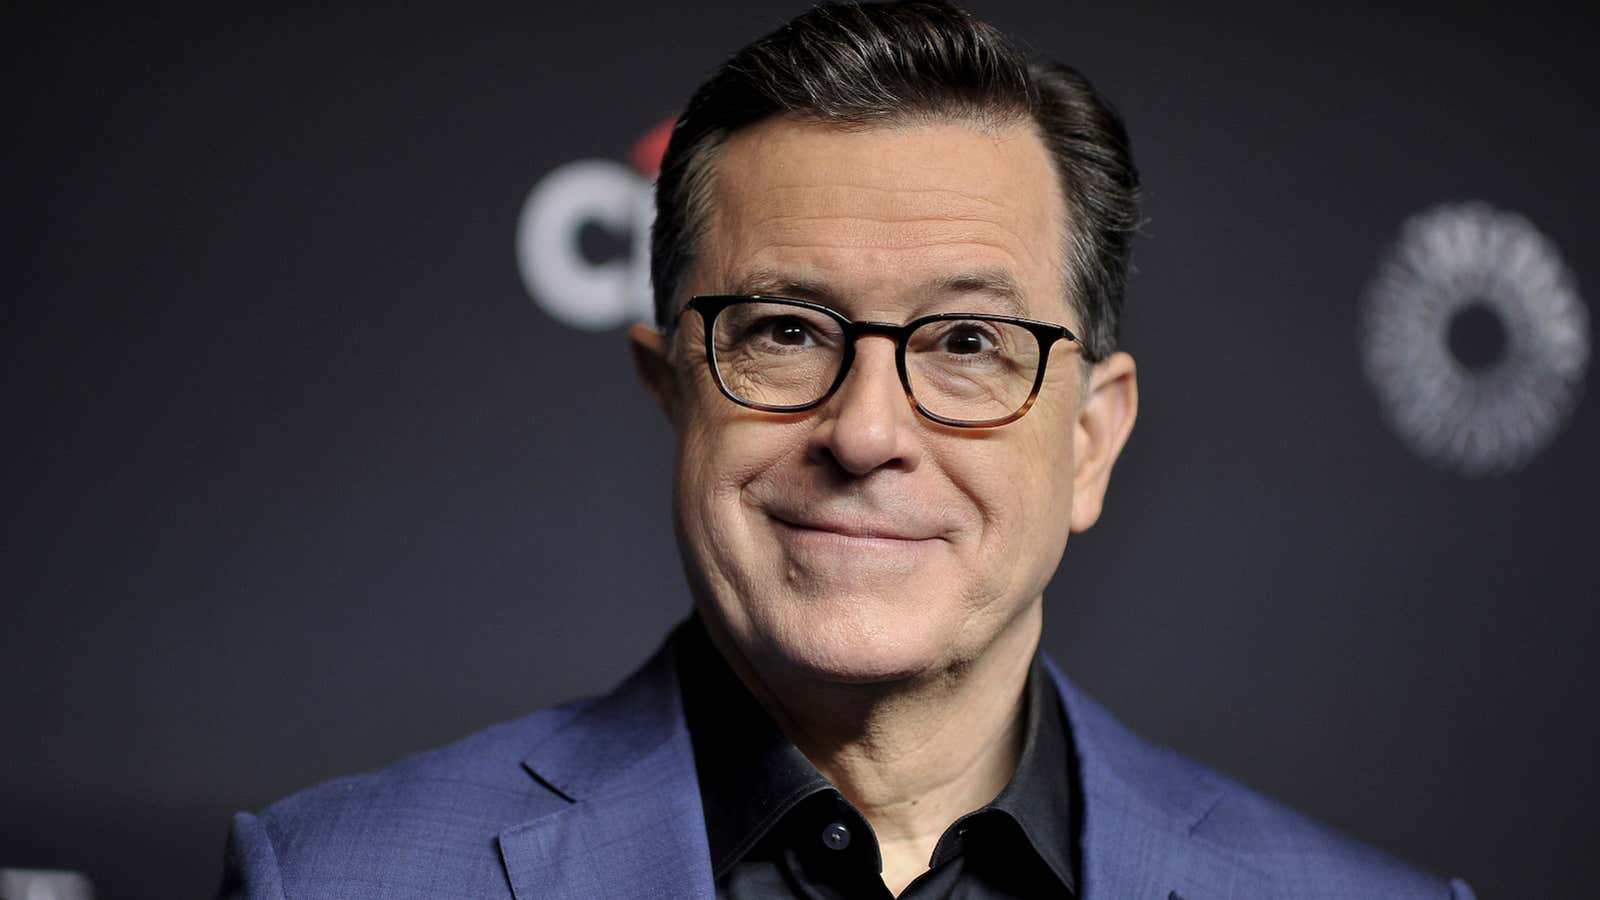 “At a very young age, I decided I was not gonna have a Southern accent,” notes comedian Stephen Colbert.